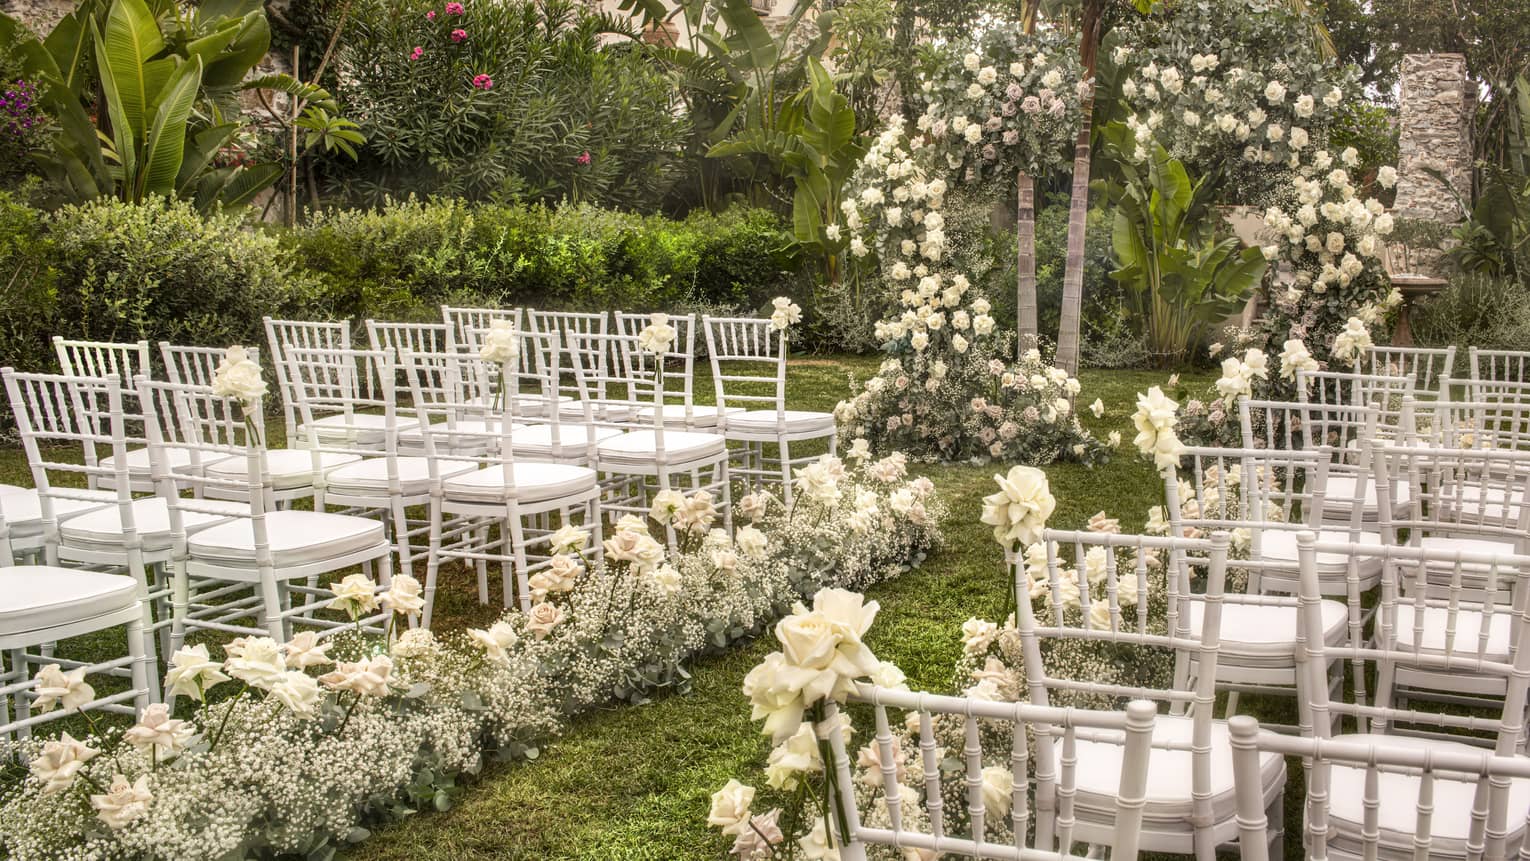 Rows of white dining chairs lined up along floral aisle leading to flower arch amid garden wedding setup